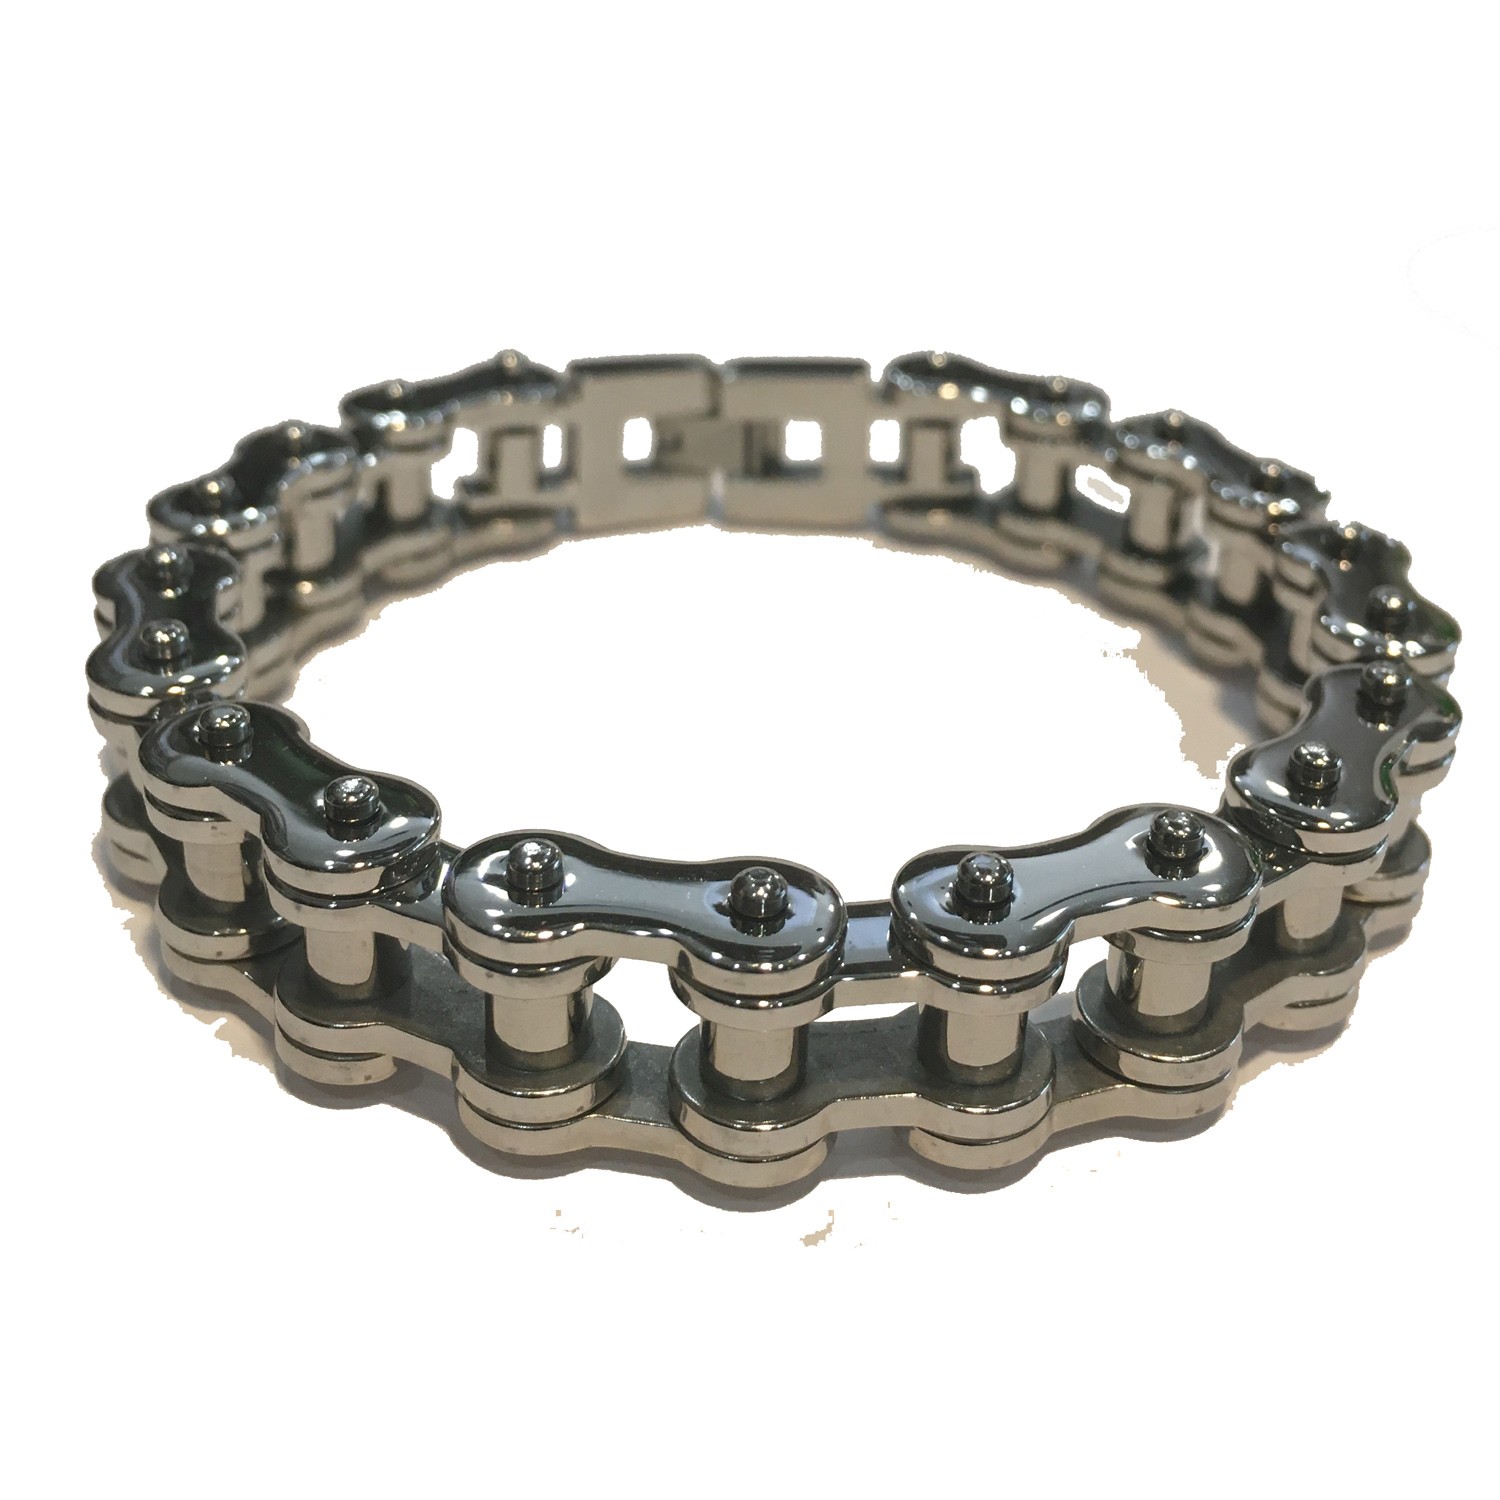 SHINY SILVER MENS MOTORCYCLE CHAIN  BRACELET STAINLESS STEEL 9